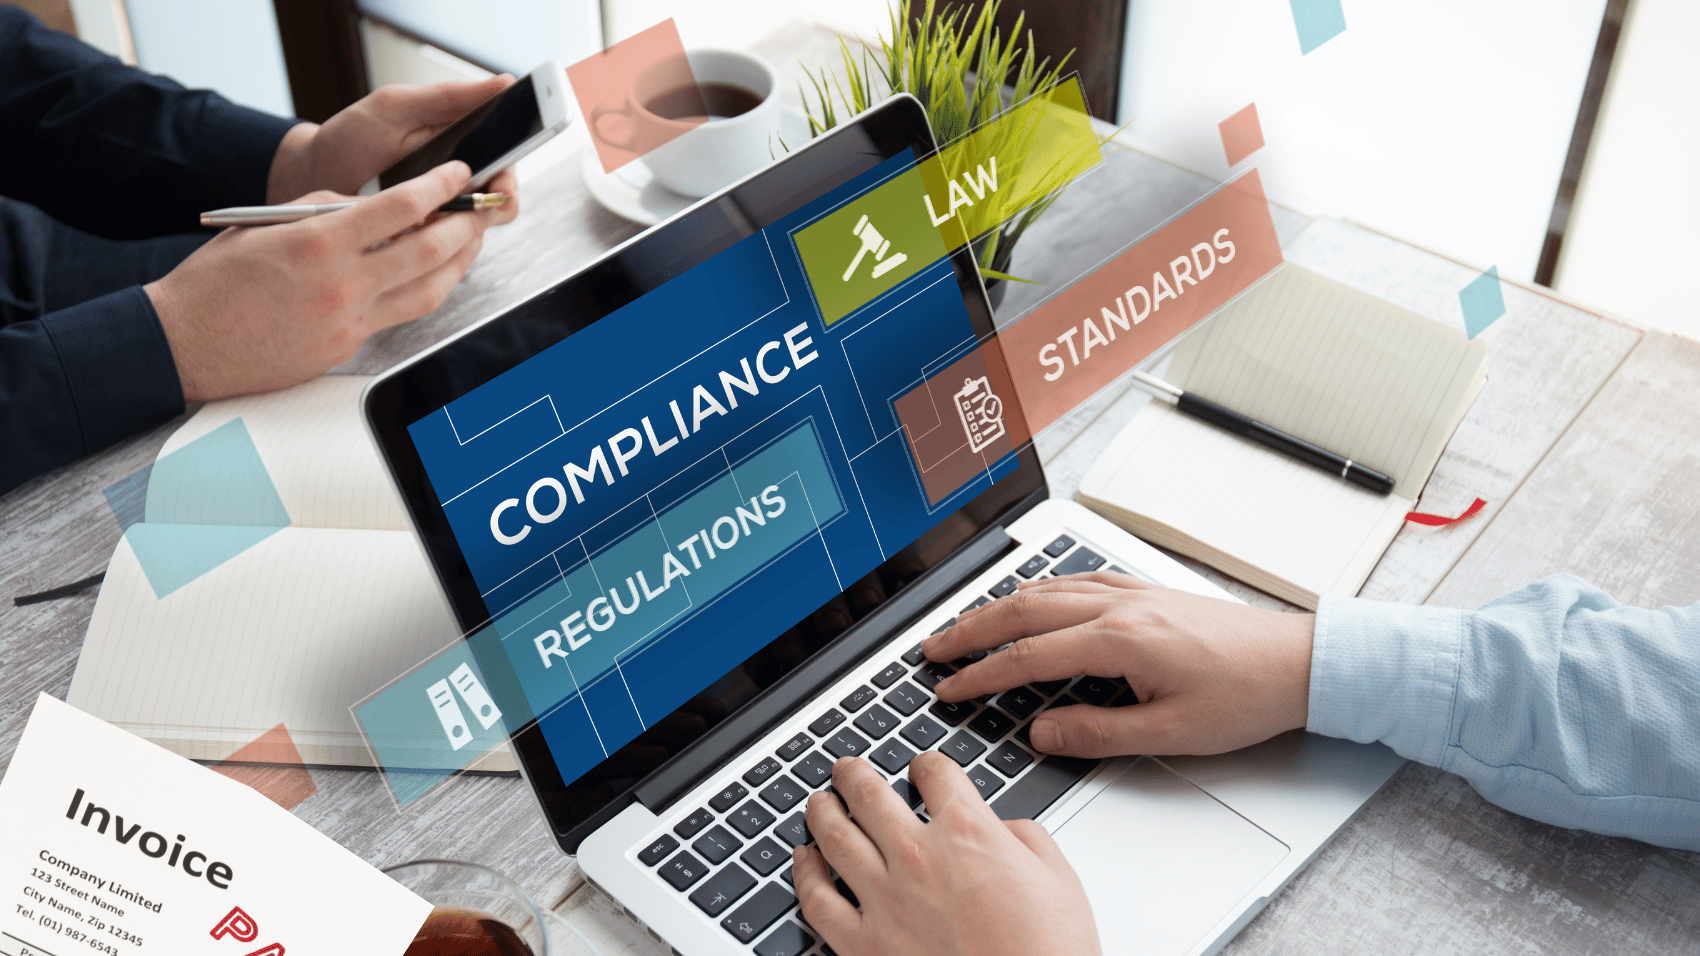 Impact of new e-invoicing compliance requirements on the organizations